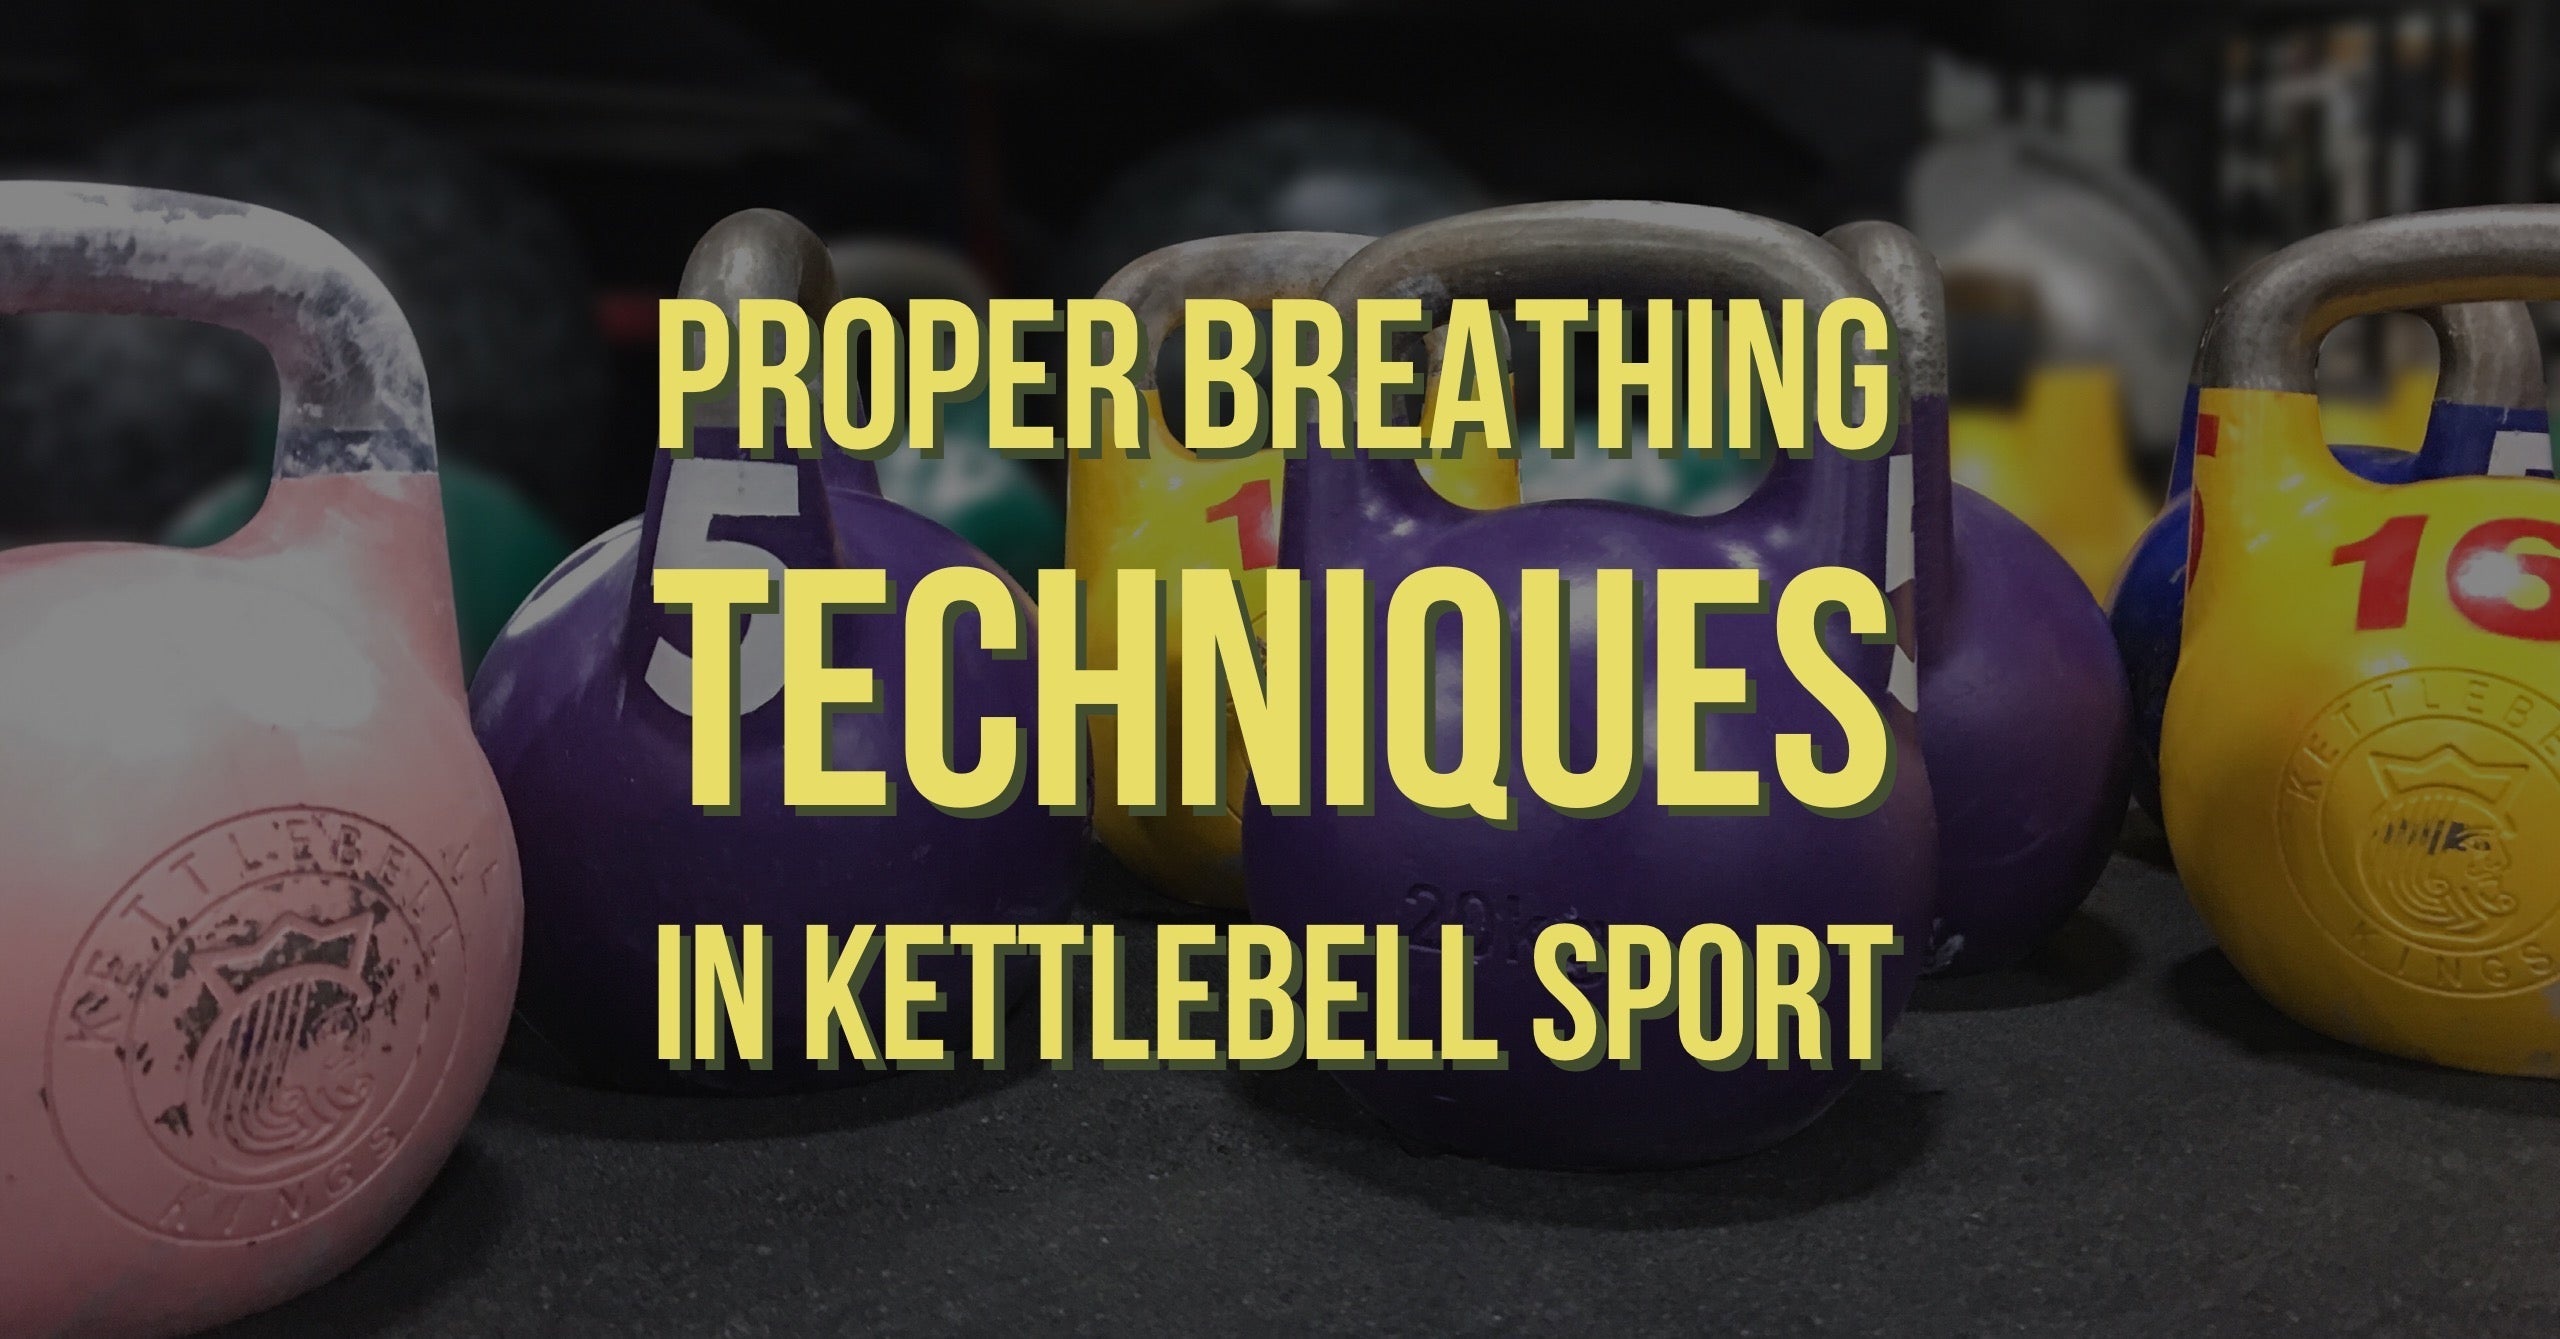 Learn Proper Breathing Techniques For Kettlebell Sport From a World Champion Part 2